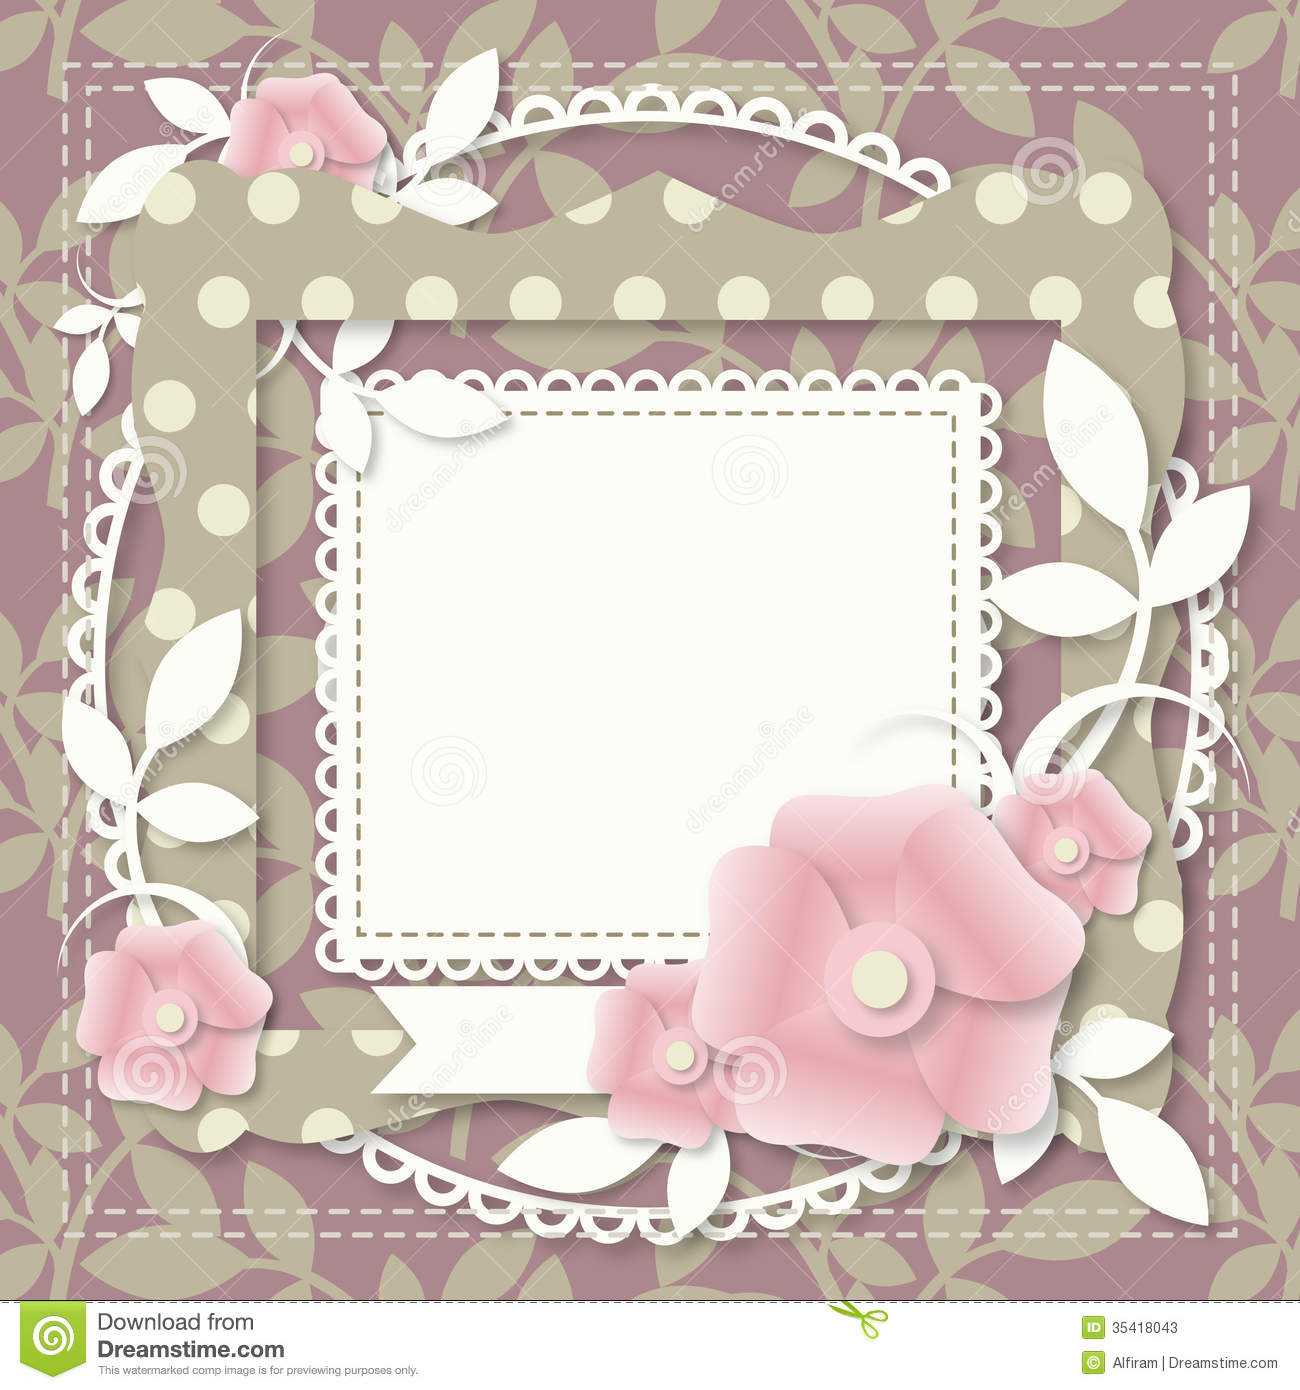 Template Of Greeting Card Stock Vector. Illustration Of Intended For Greeting Card Layout Templates